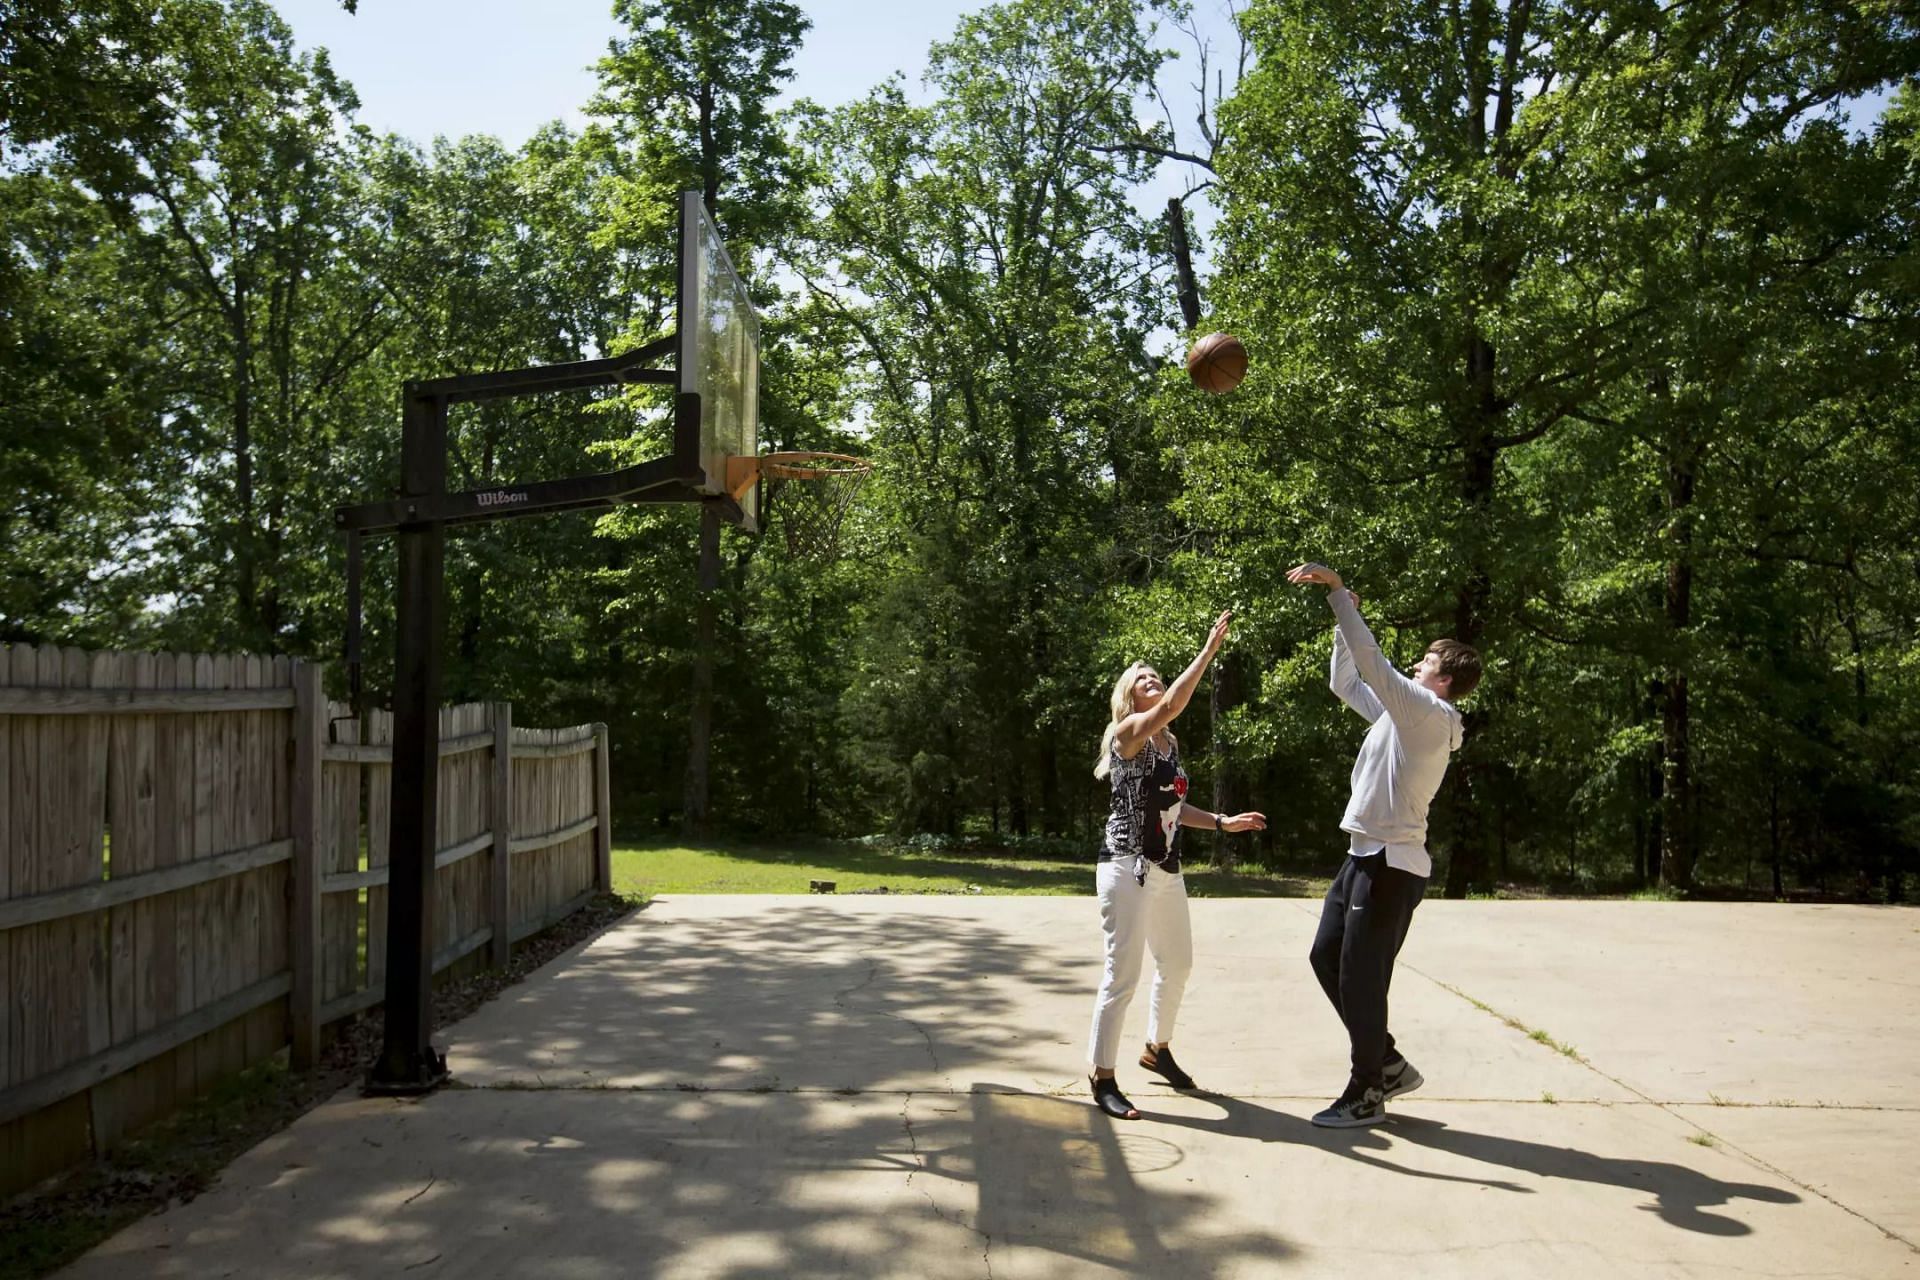 Reaves and his mother, Nicole Wilkett, playing basketball in their 300-acre farm (Photo credit: Steven Jones / For The Times)